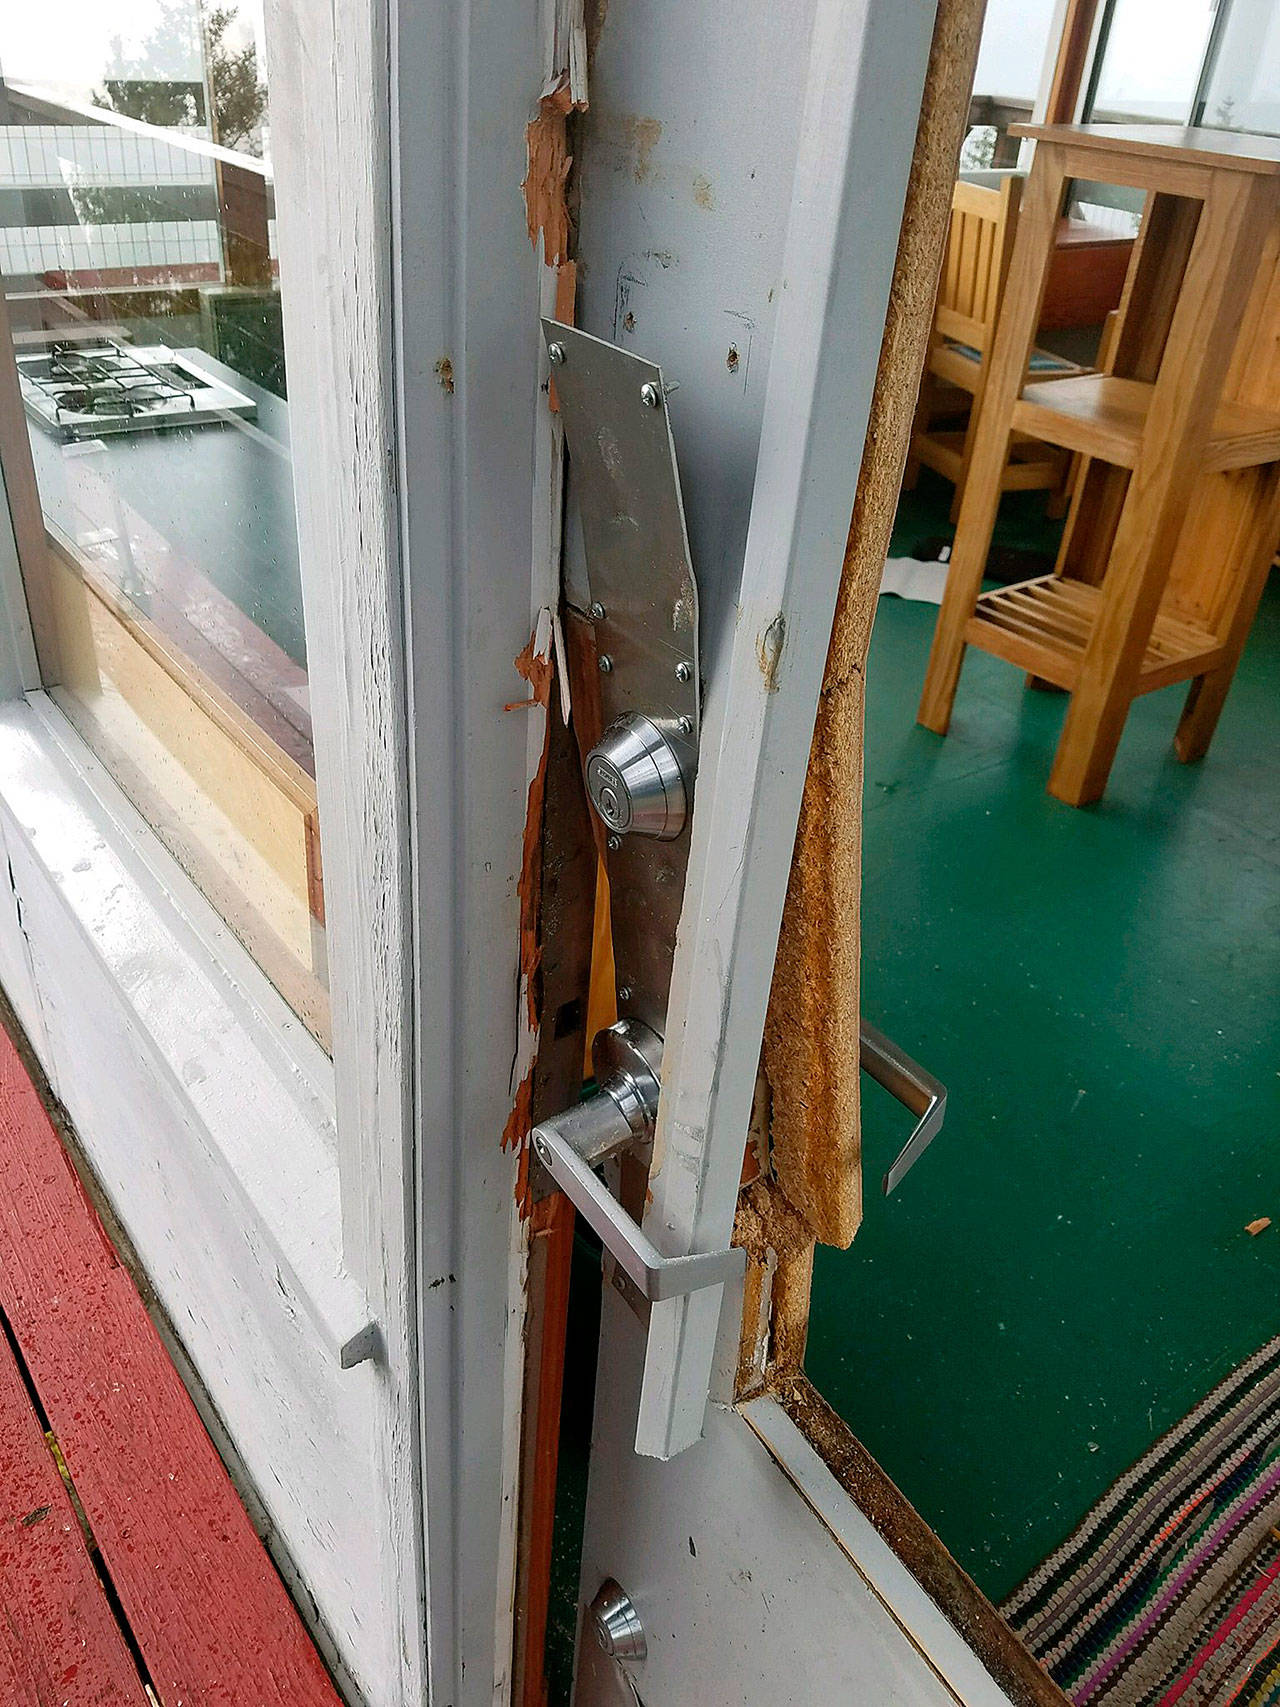 Thieves broke a door and caused thousands of dollars in damage to the Heybrook fire lookout near Index. (U.S. Forest Service)